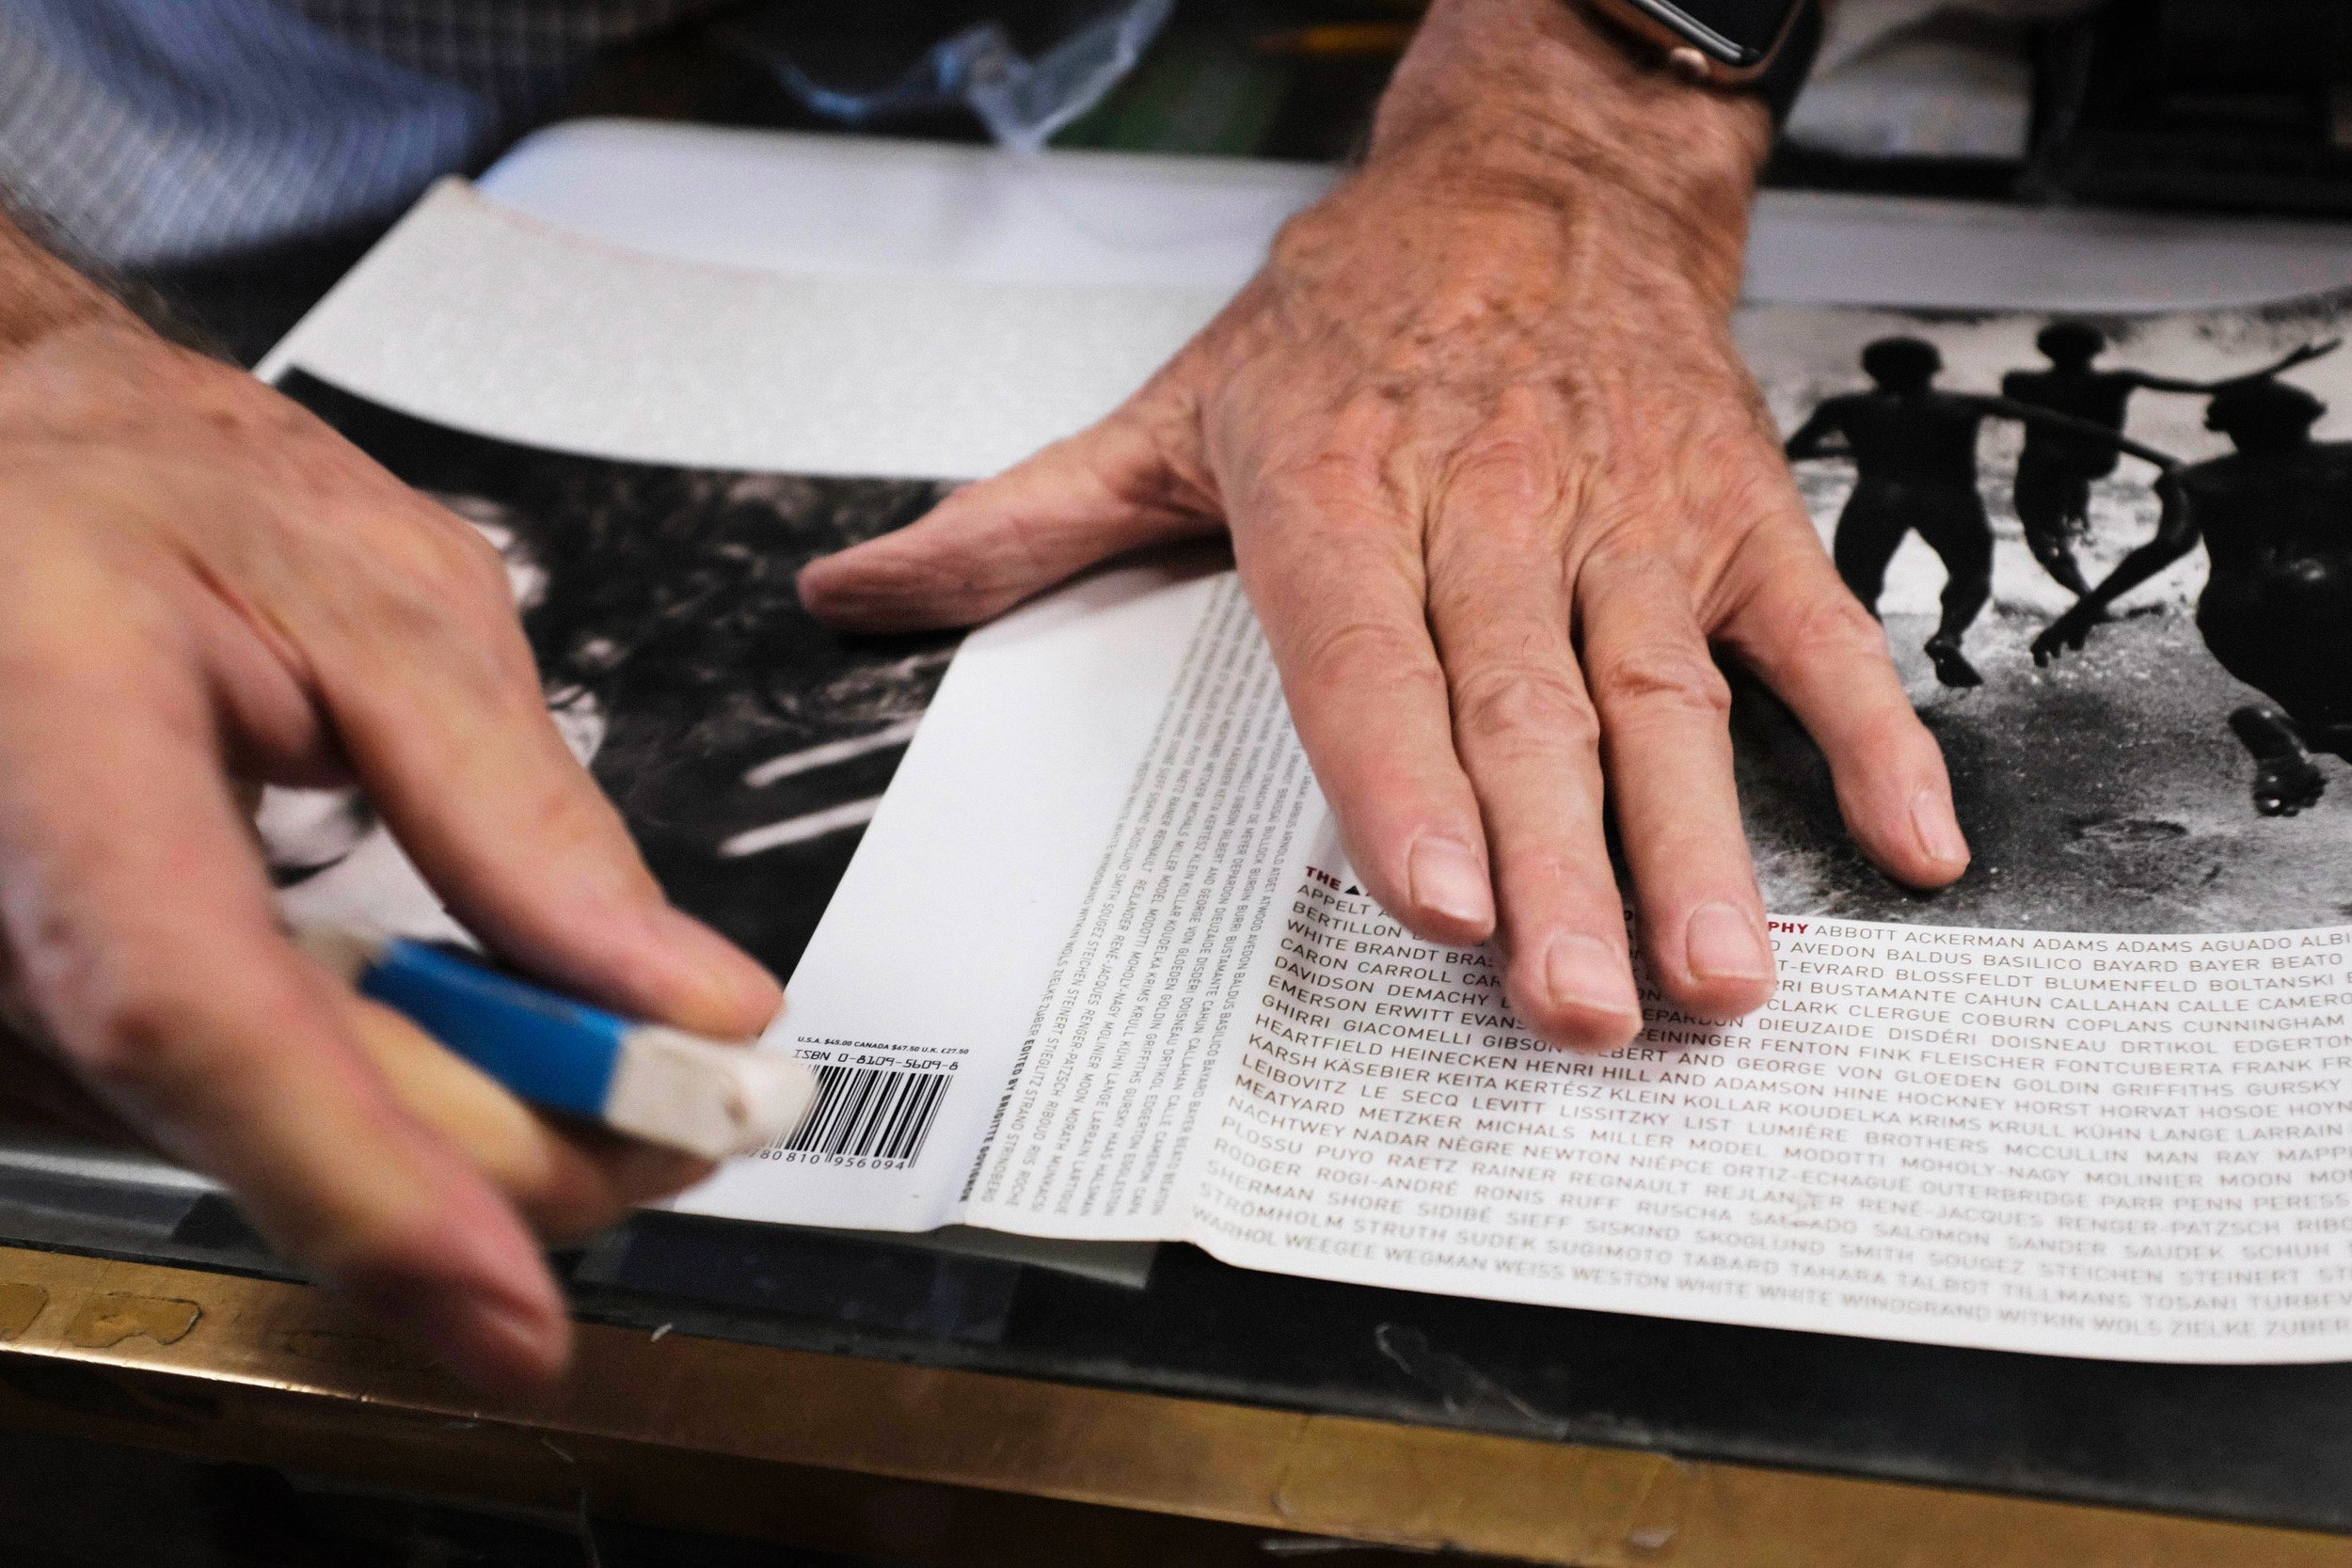  Following his treatment of oil, Bill Wurt uses an eraser to get out tougher spots of dirt on book covers before covering them in a new dust jacket. Wurt explains that some spots will smear if using just a wet cloth to remove, which is why he is usin